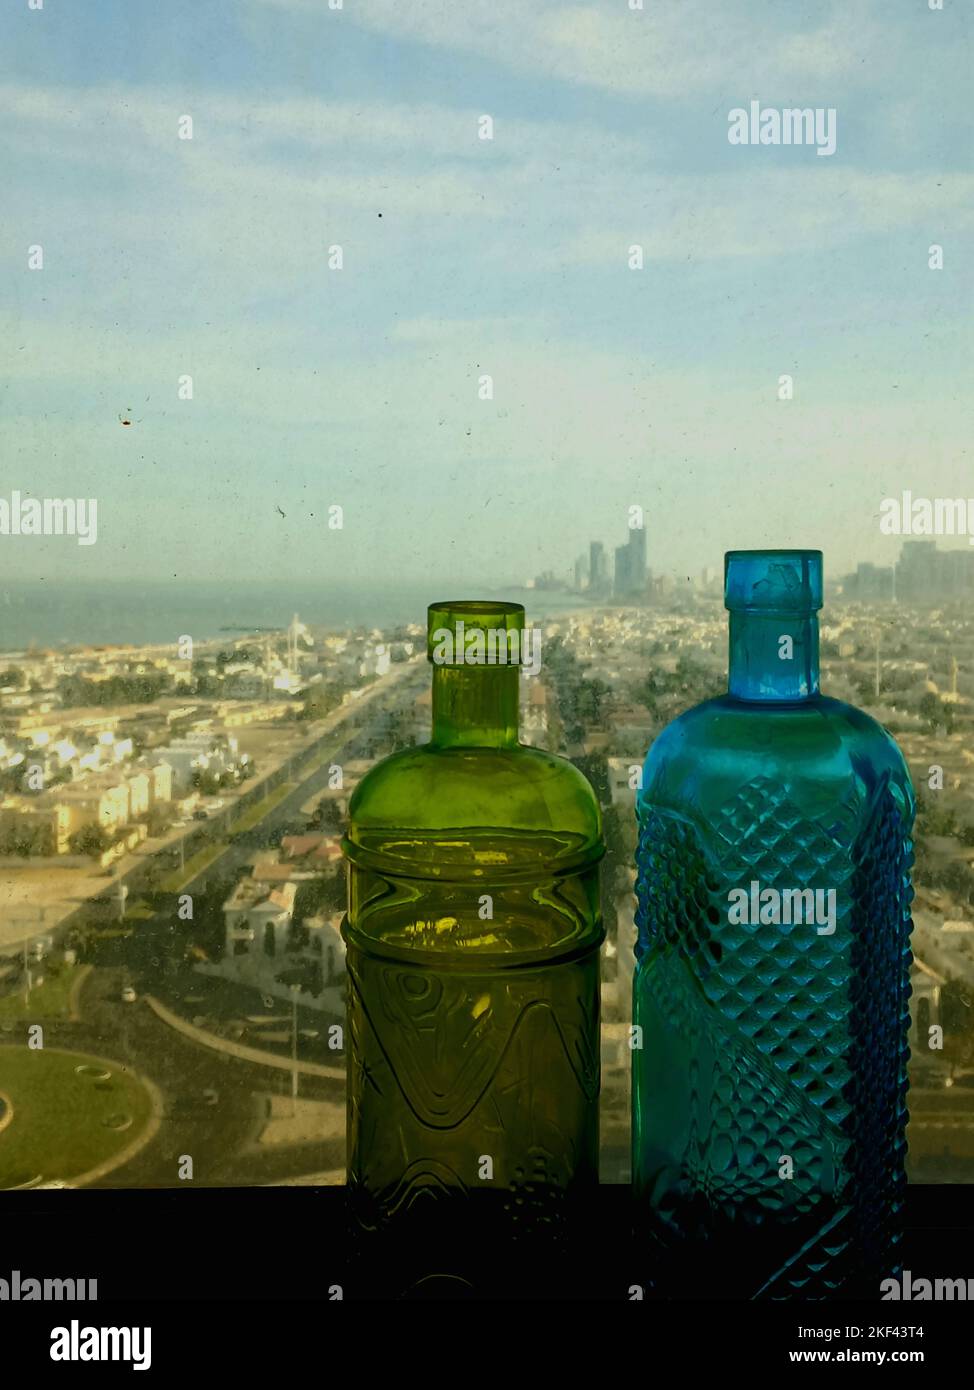 A vertical closeup shot of two vintage bottles against the Sharjah city view, UAE Stock Photo